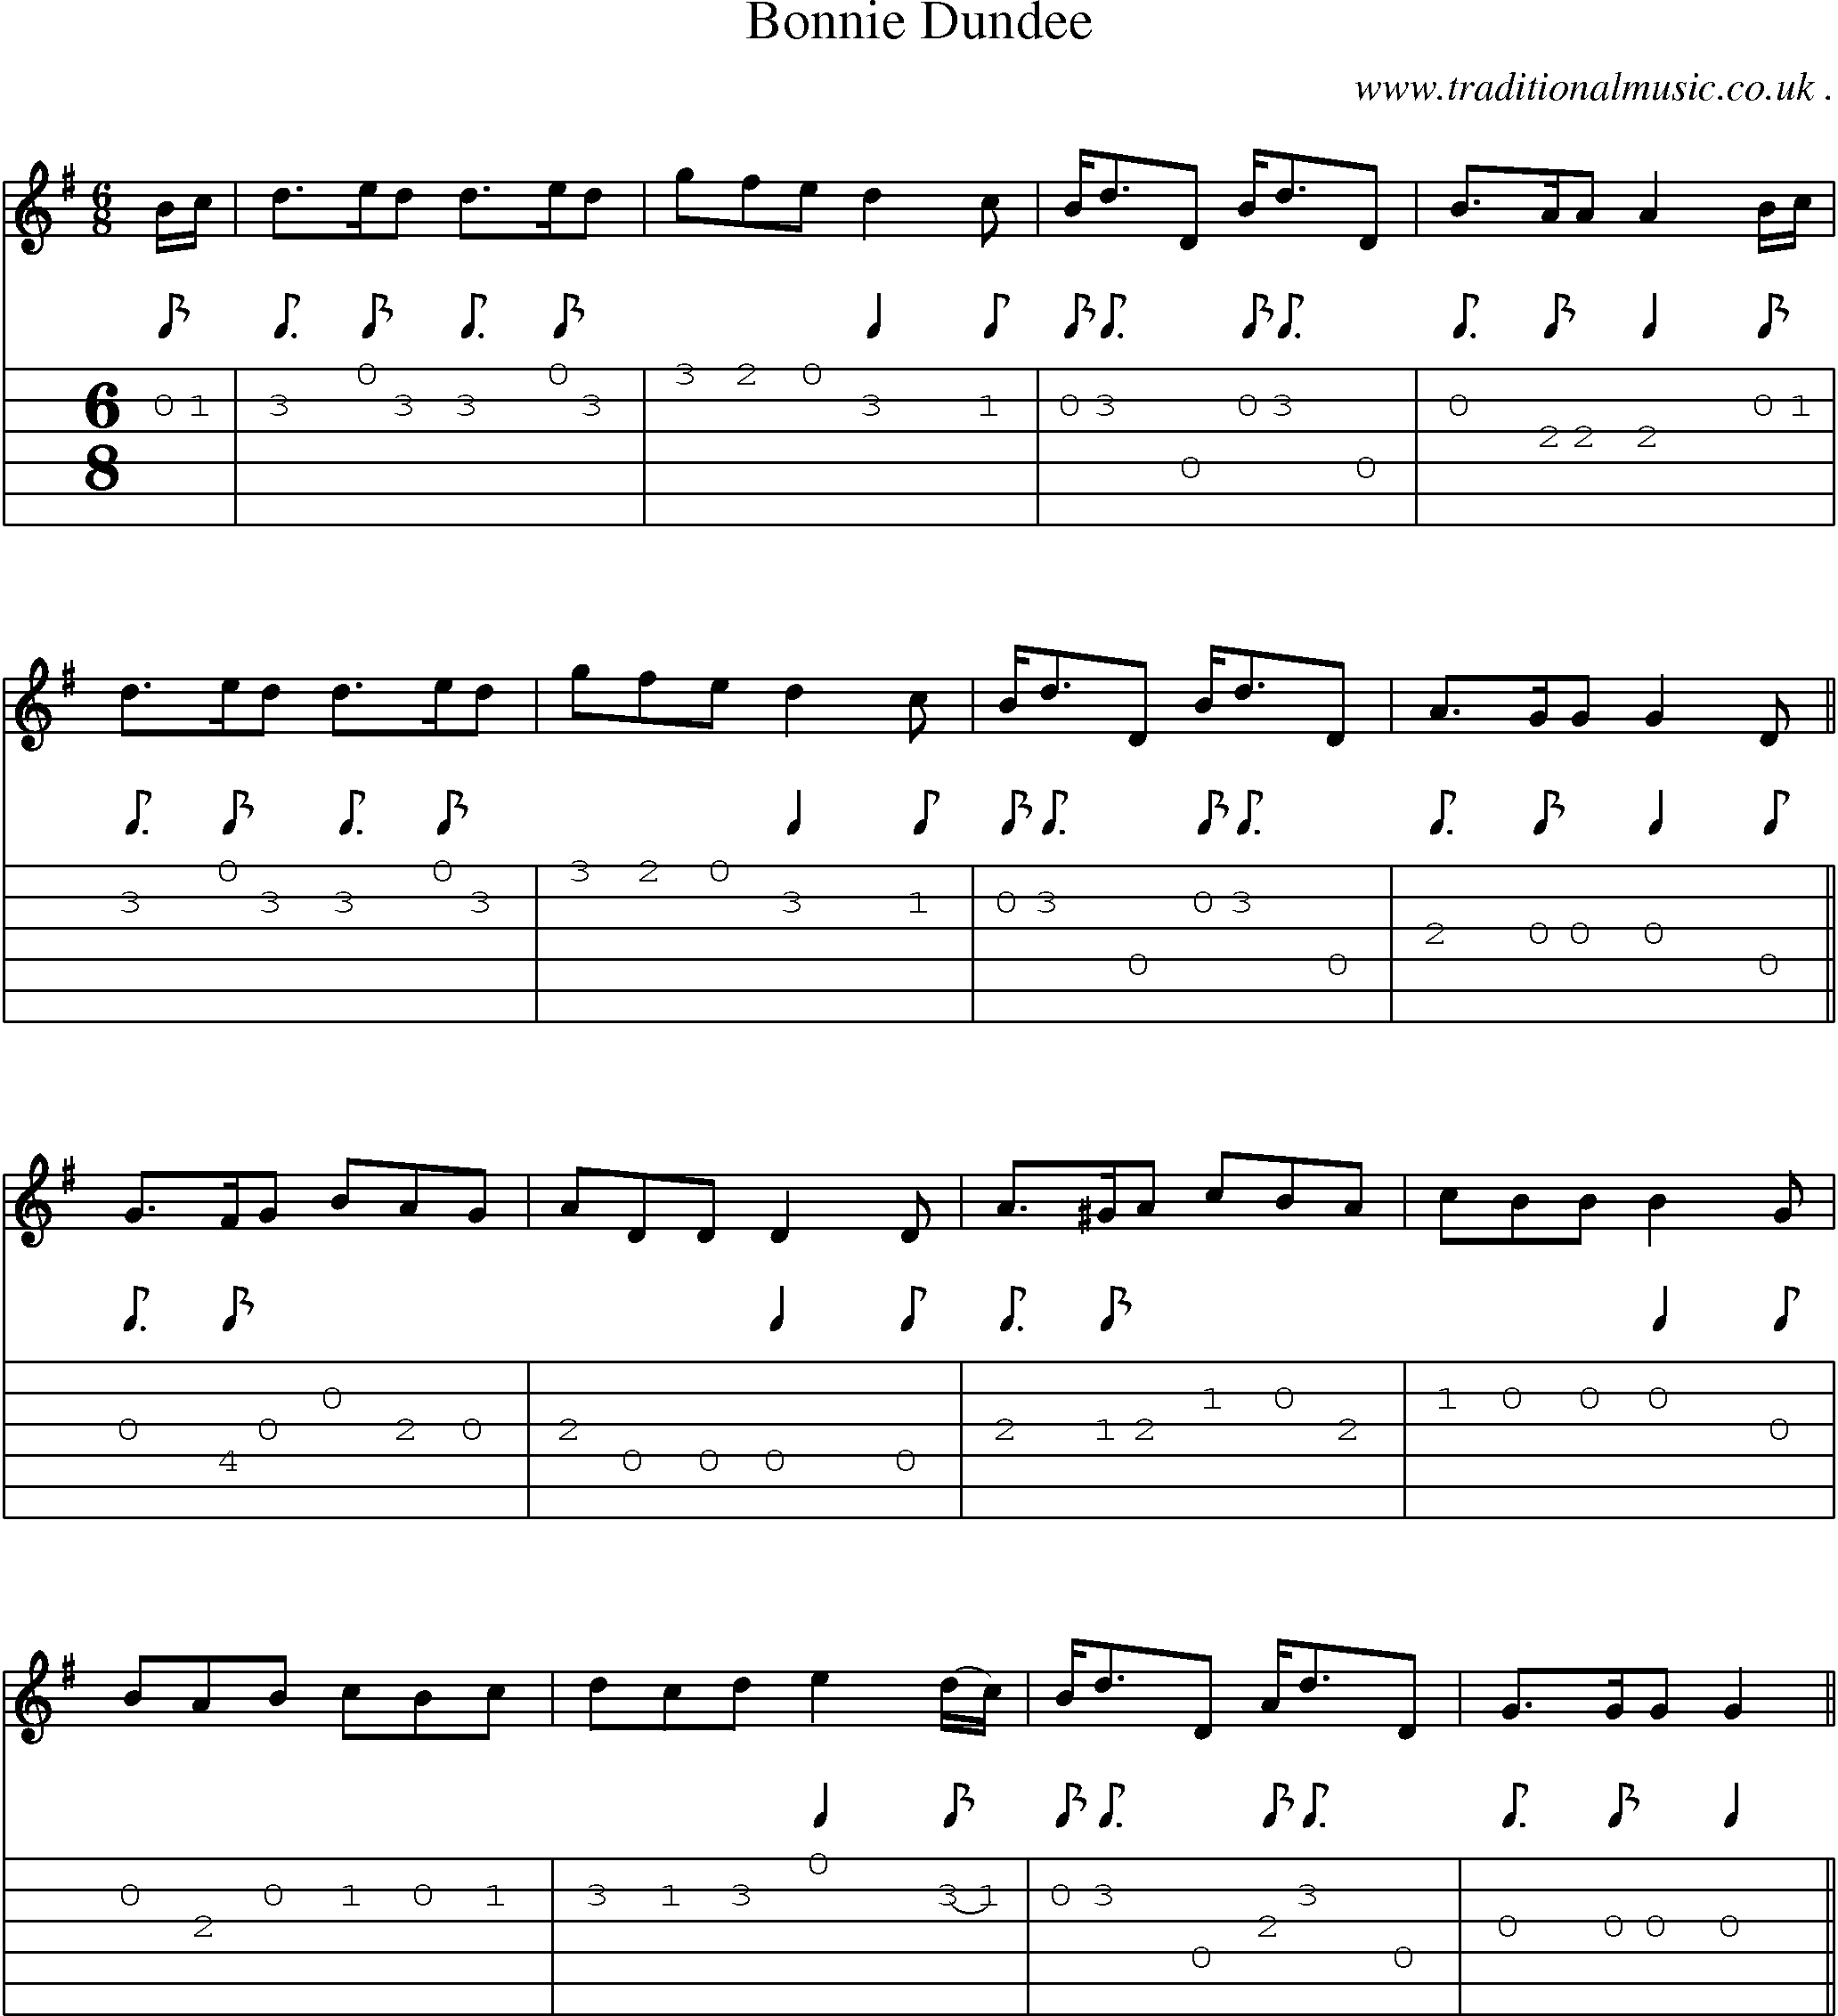 Sheet-Music and Guitar Tabs for Bonnie Dundee